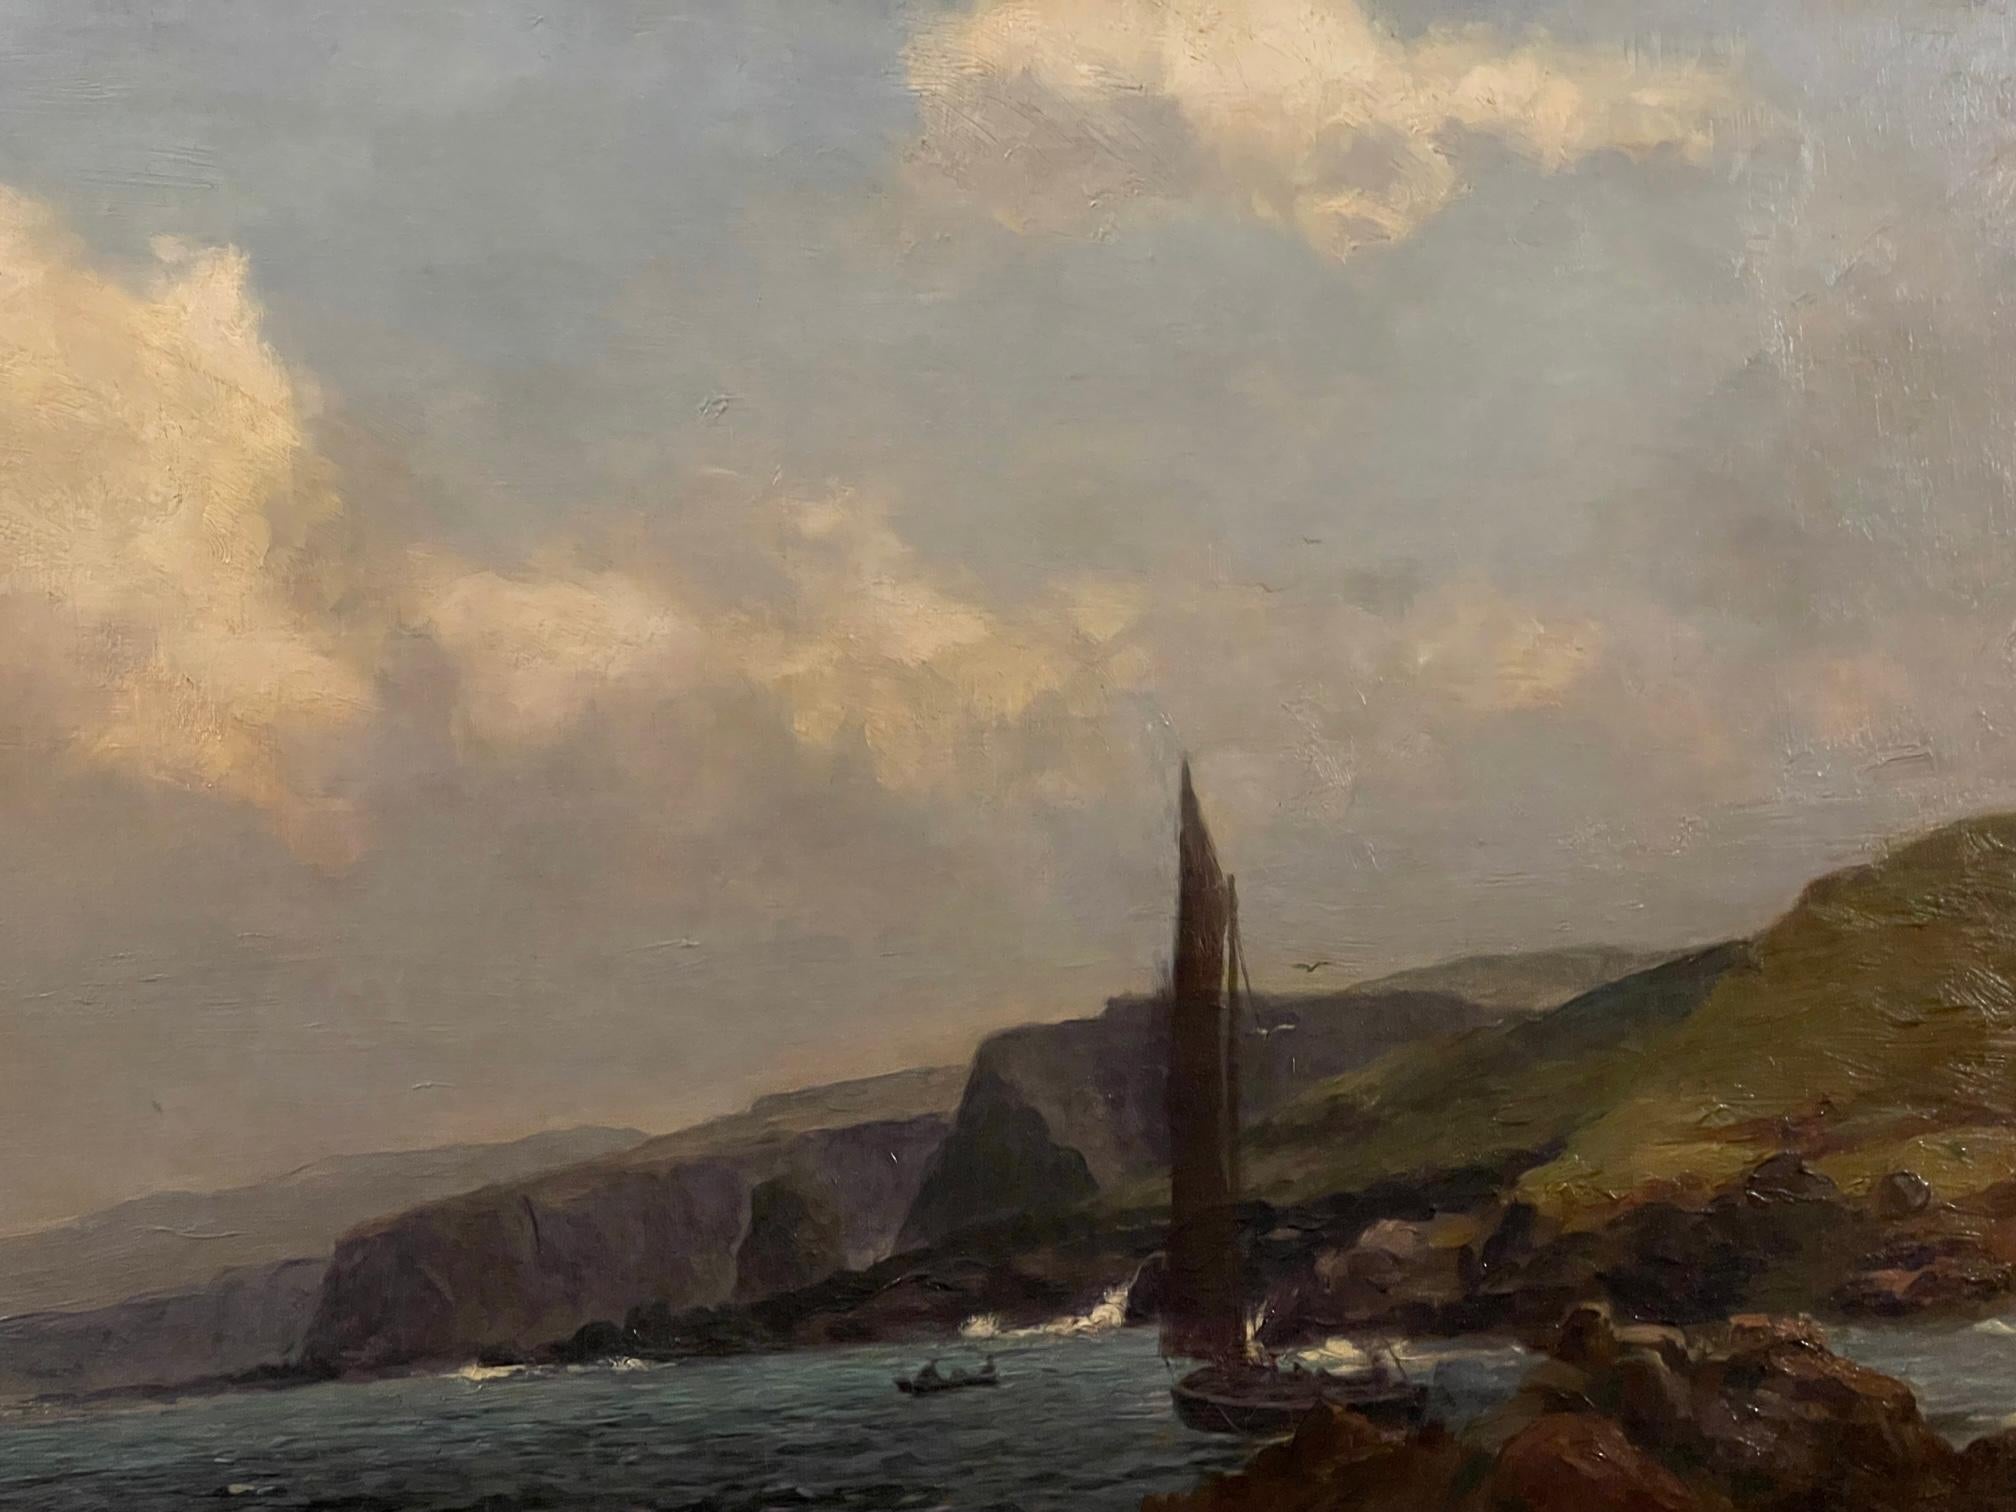 Exhibition-sized painting of Iona Island coast by celebrated Scottish artist Duncan Cameron (1837-1916), this is a large and expansive 19th century landscape oil painting on canvas. Renowned for his landscape paintings, this work captures the